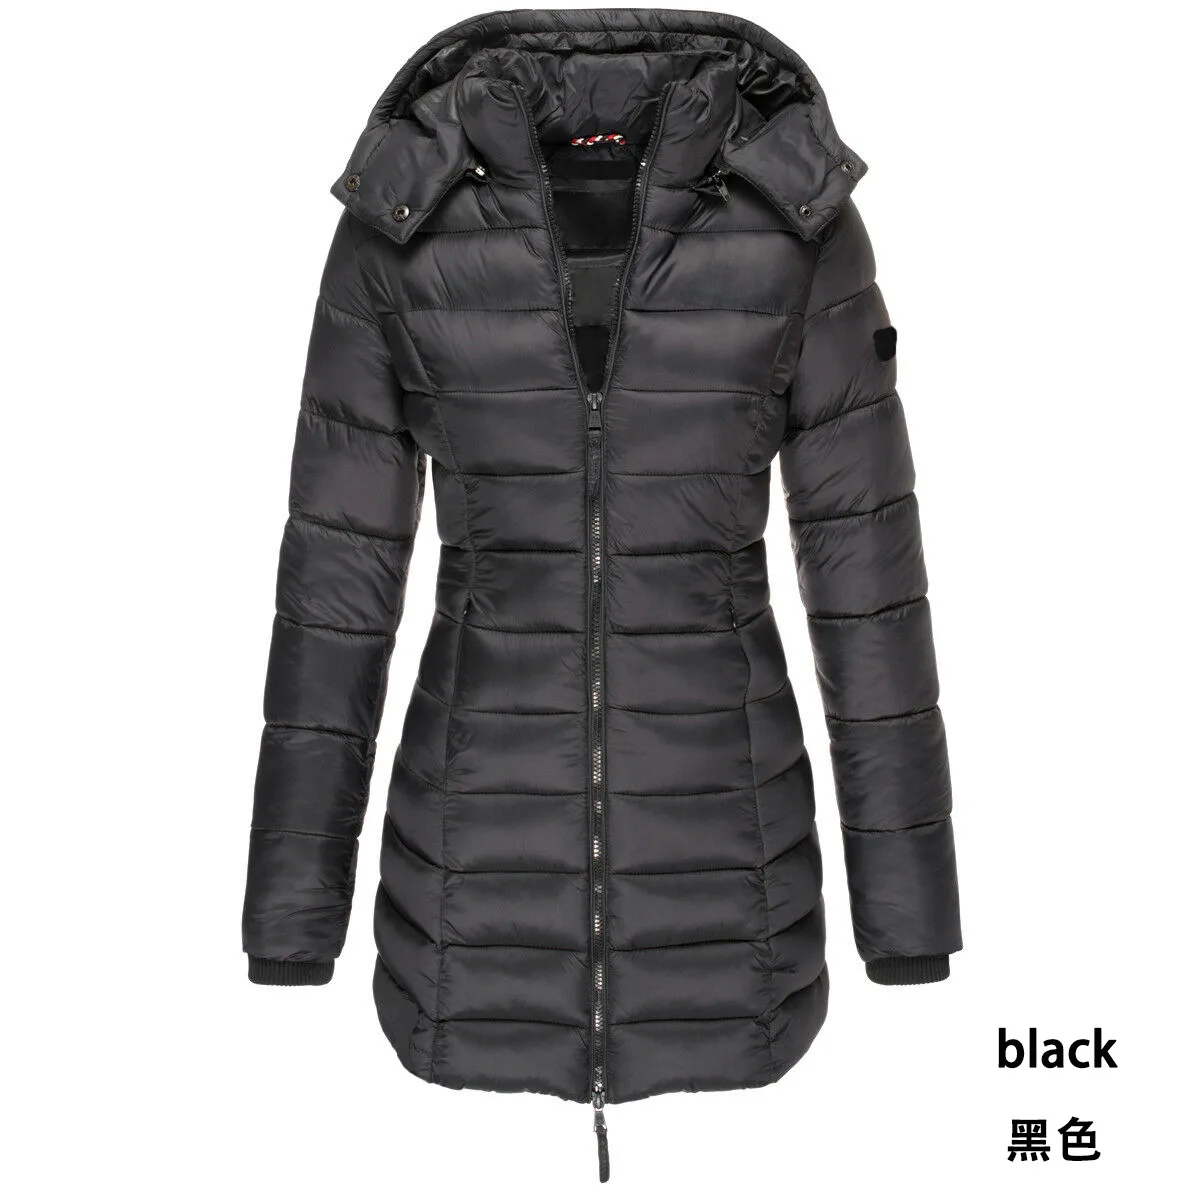 winter coat clothes women Jacket medium long hooded casual down cotton jacket women's quilted coat enlarge